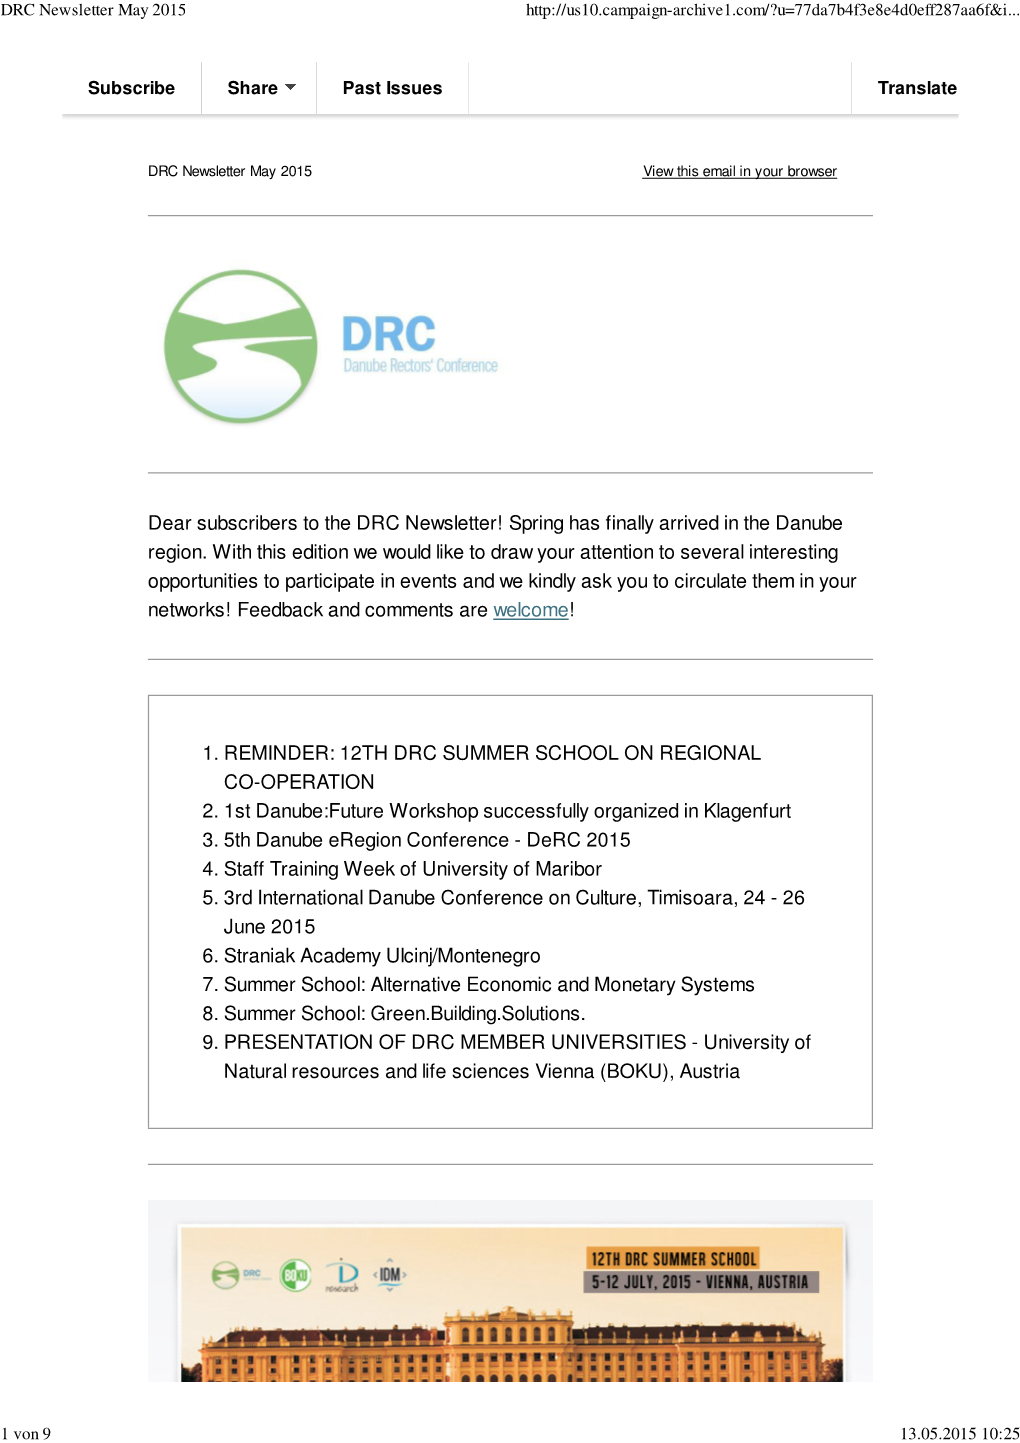 DRC Newsletter May 2015